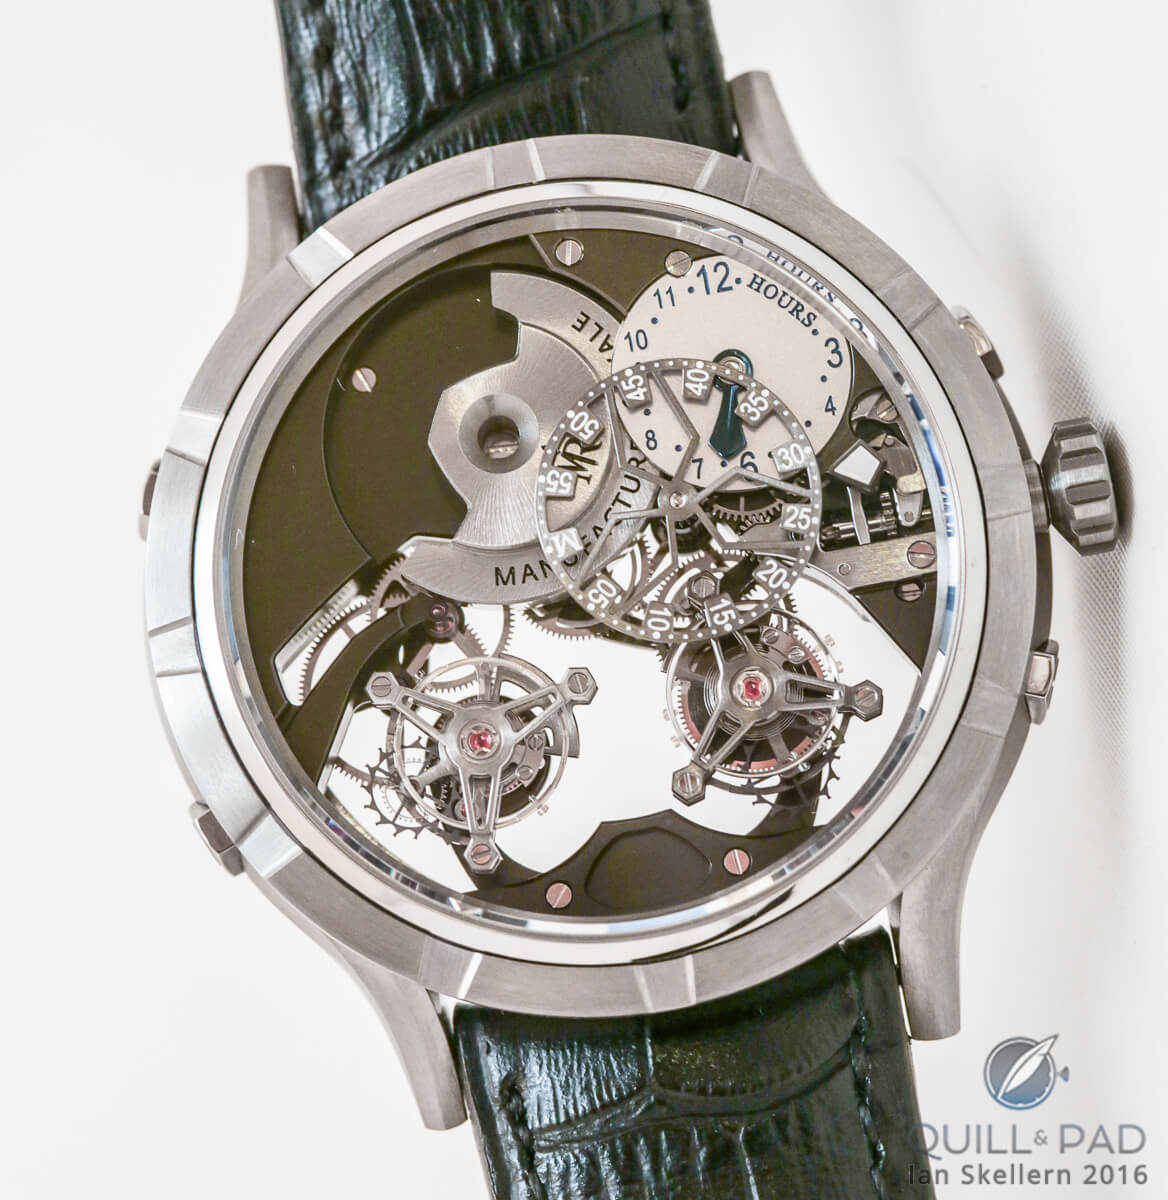 Manufacture Royale 1770 Micromégas Revolution in titanium with olive green movement